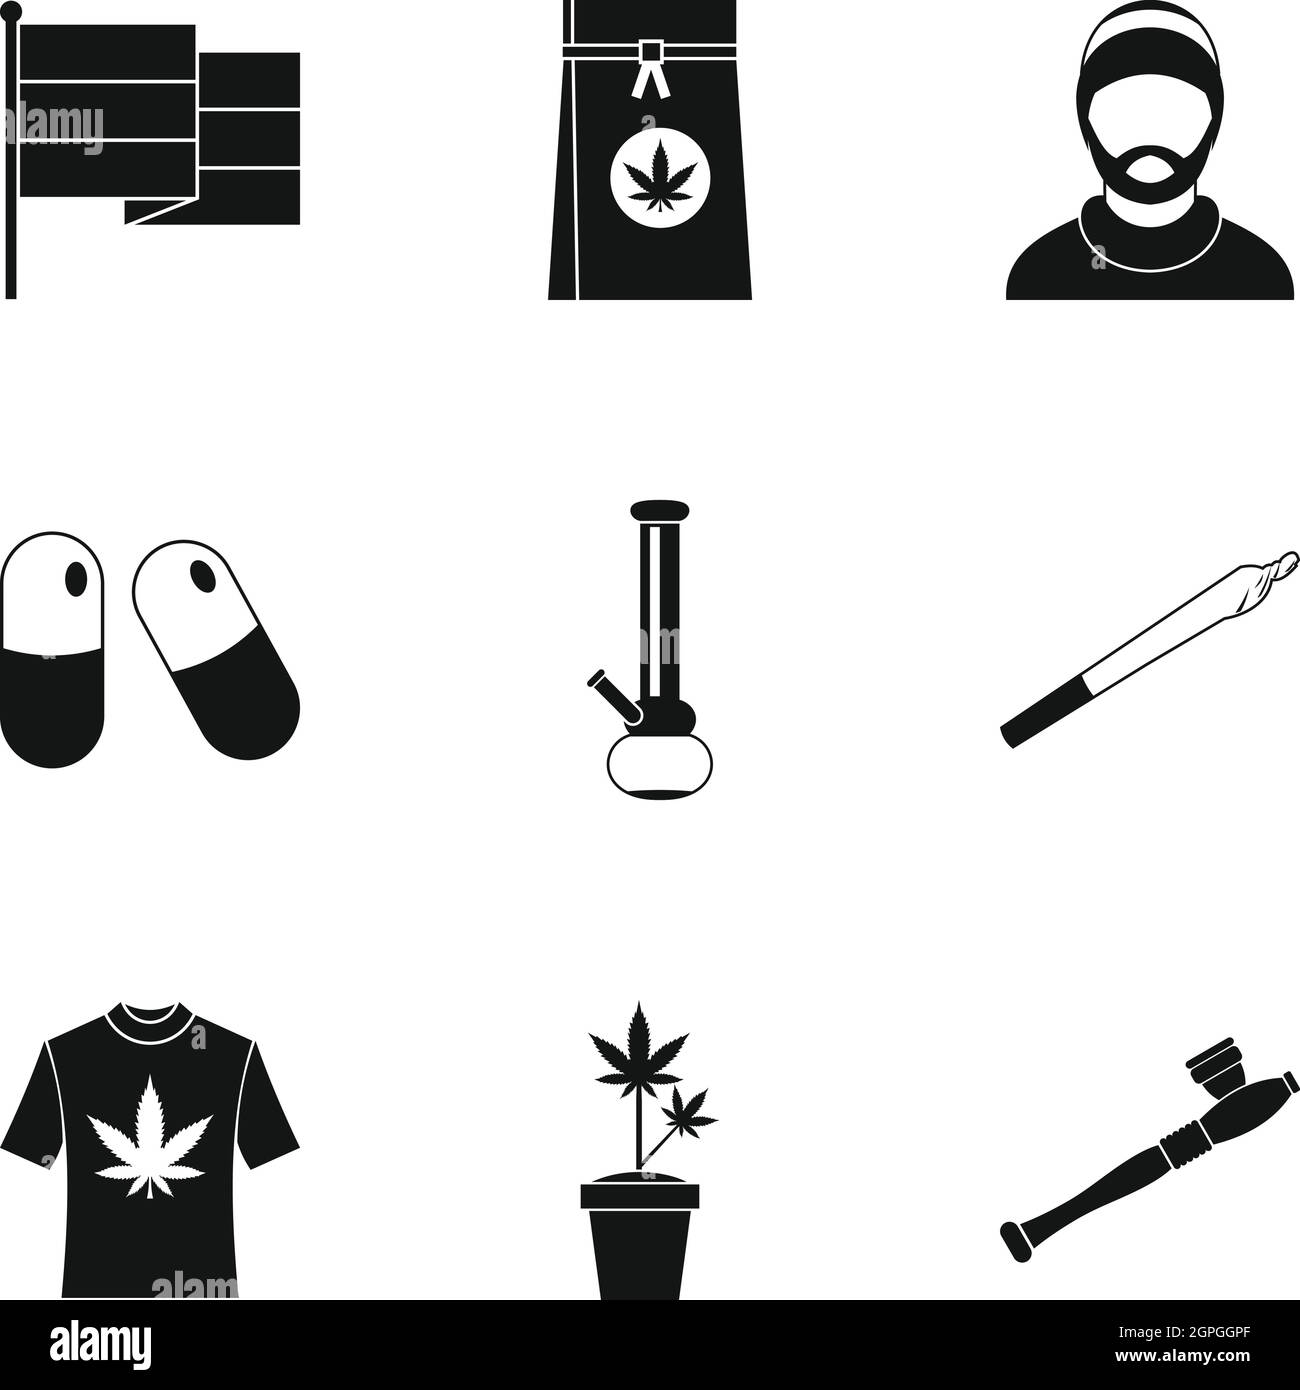 Hashish icons set, simple style Stock Vector